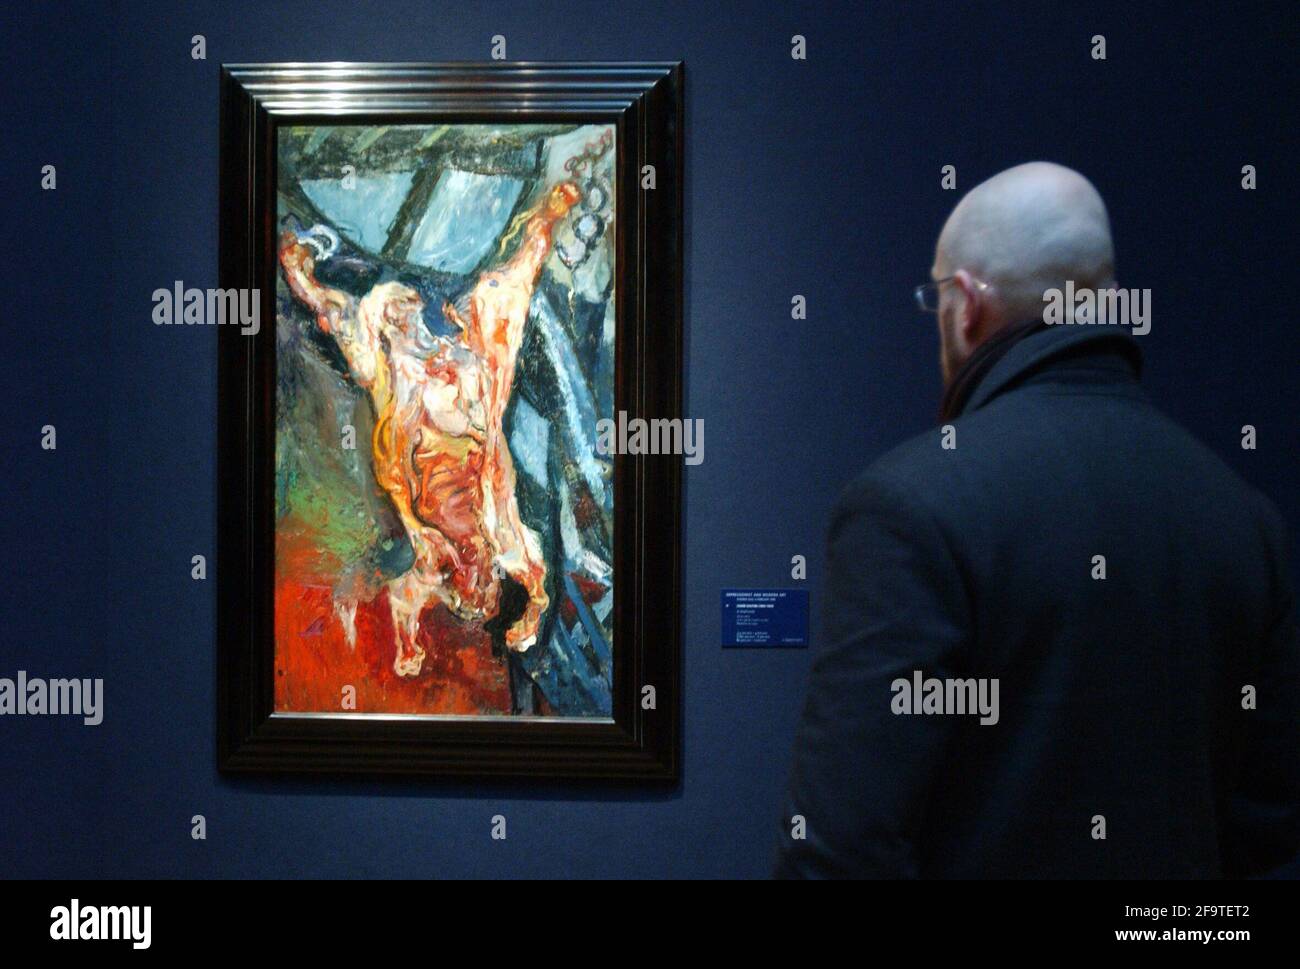 LE BOEUF ECORCHE BY CHAIM SOUTINE AT THE EVENING SALE OF IMPRESSIONIST AND MORDERN ART AT CHRISTIES .  3/2/06 Stock Photo